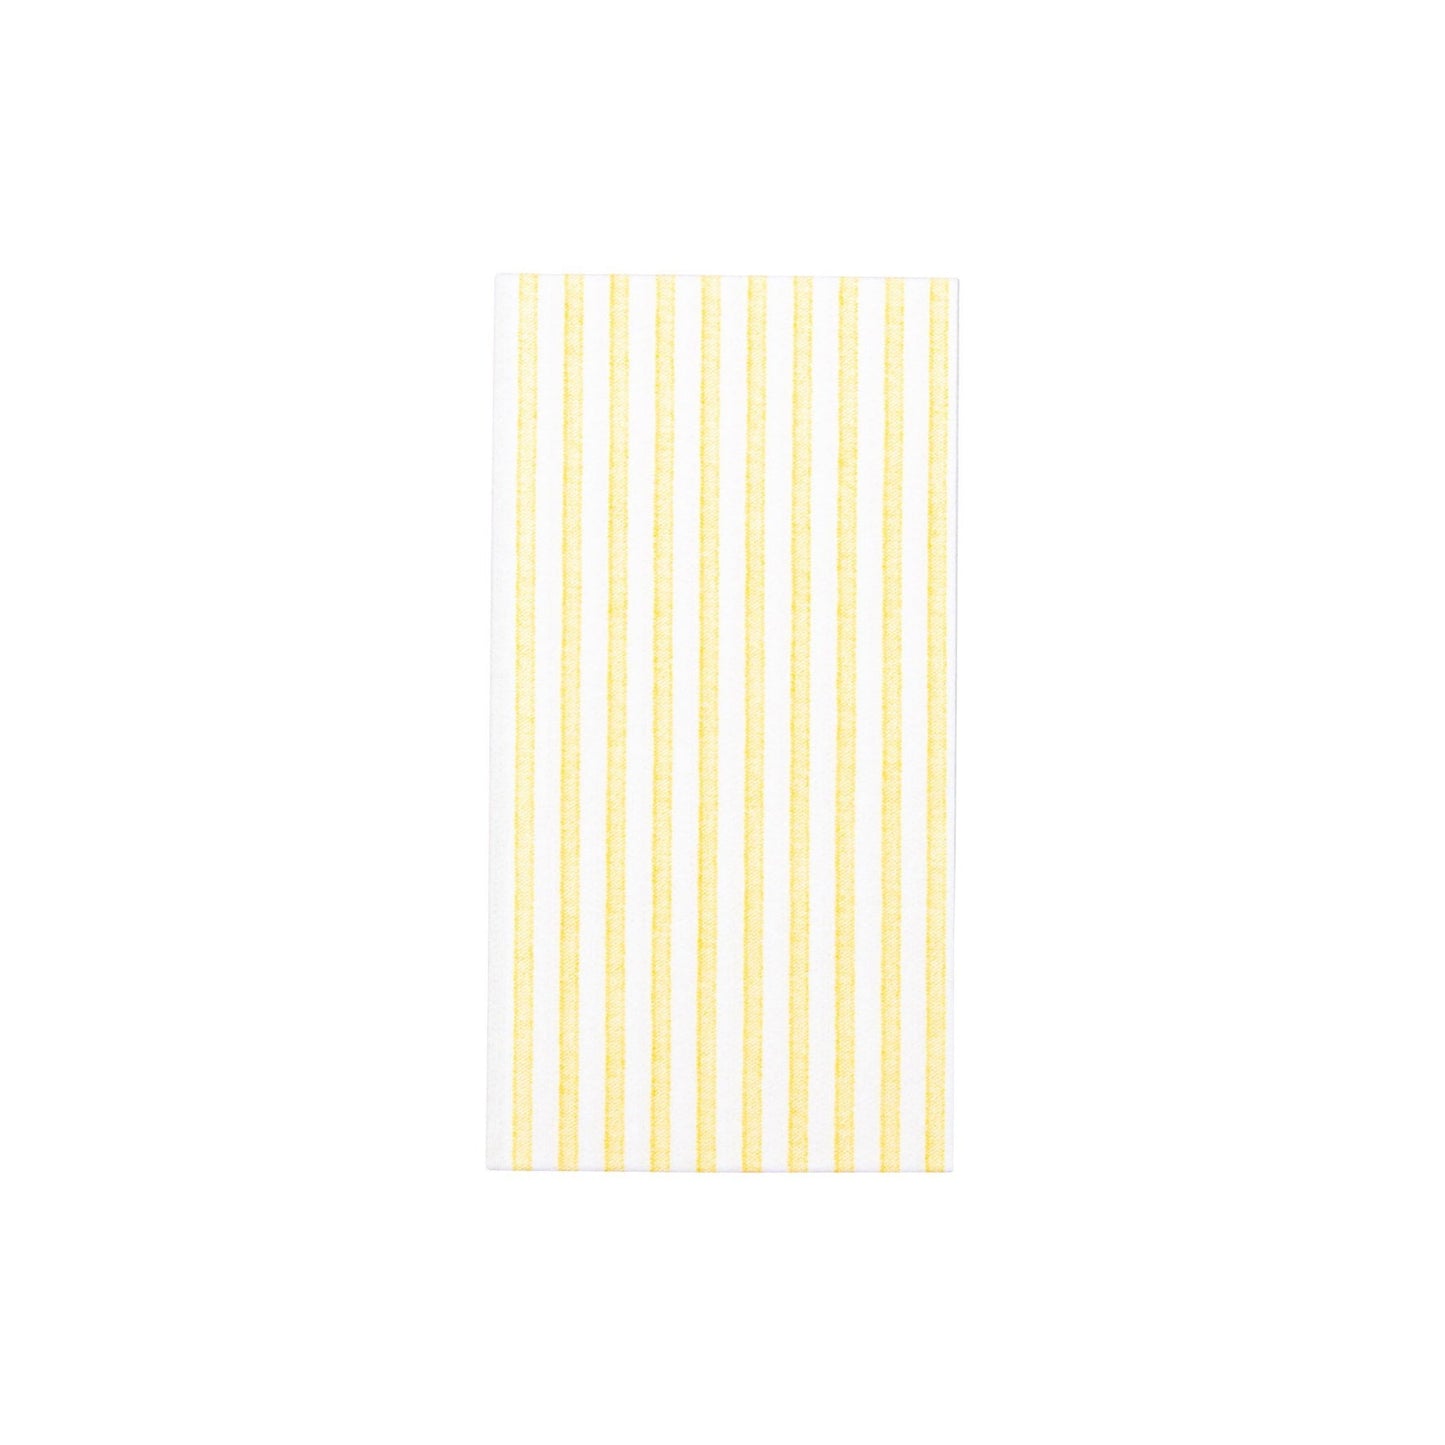 Papersoft Napkins Yellow Capri Guest Towels - Pack of 20